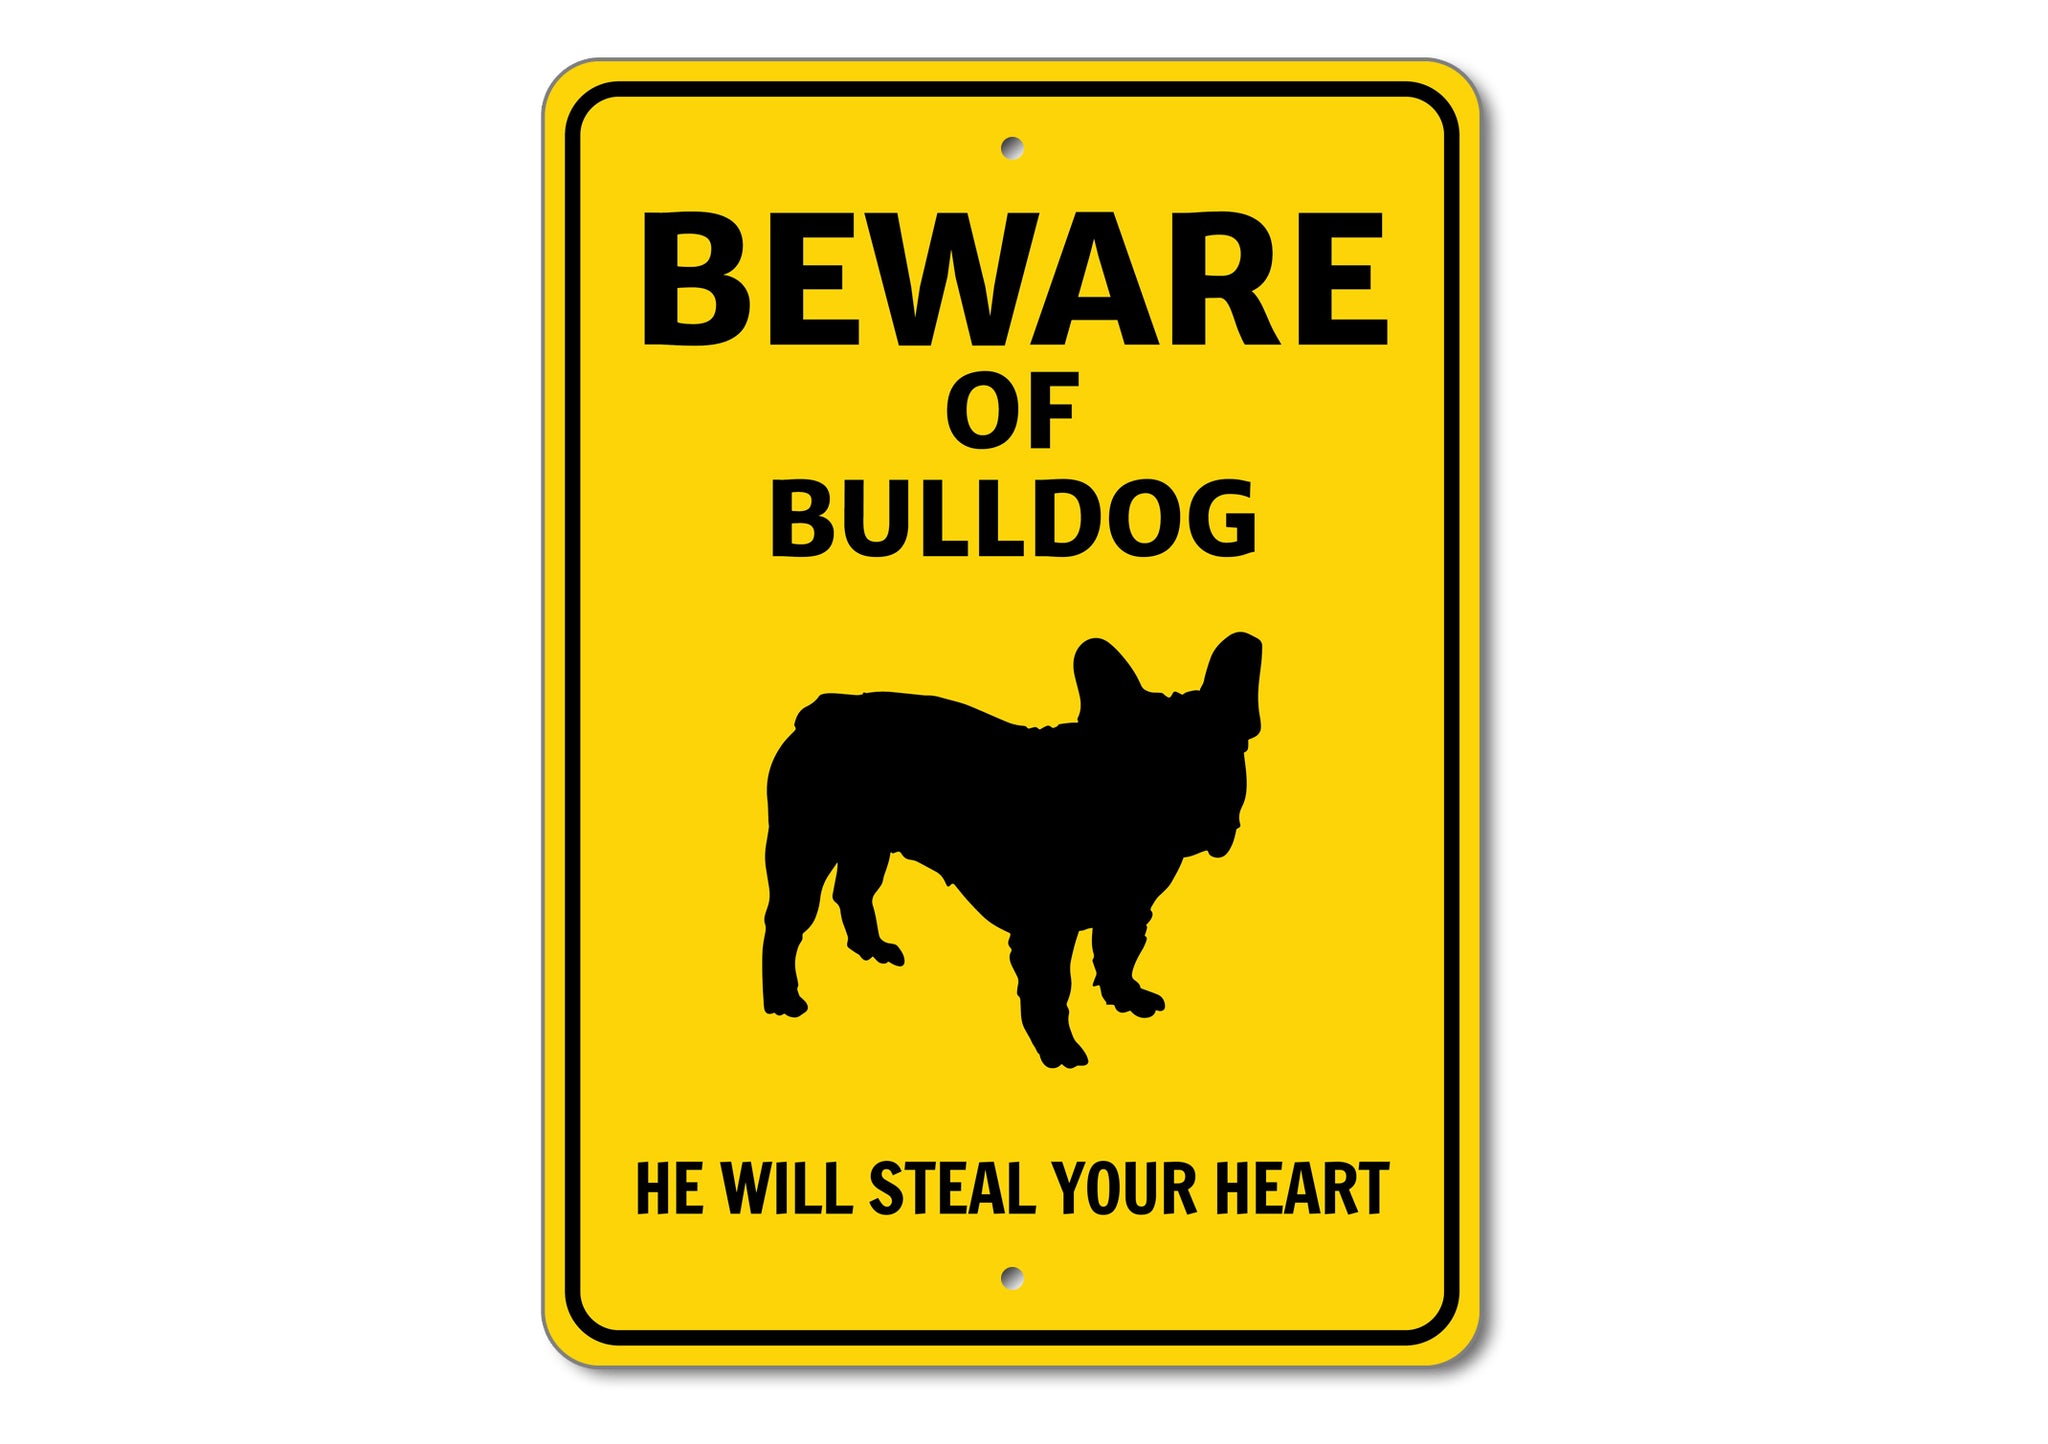 Beware He Will Steal Your Heart K9 Sign - Dog Names Starting with "B part 2"